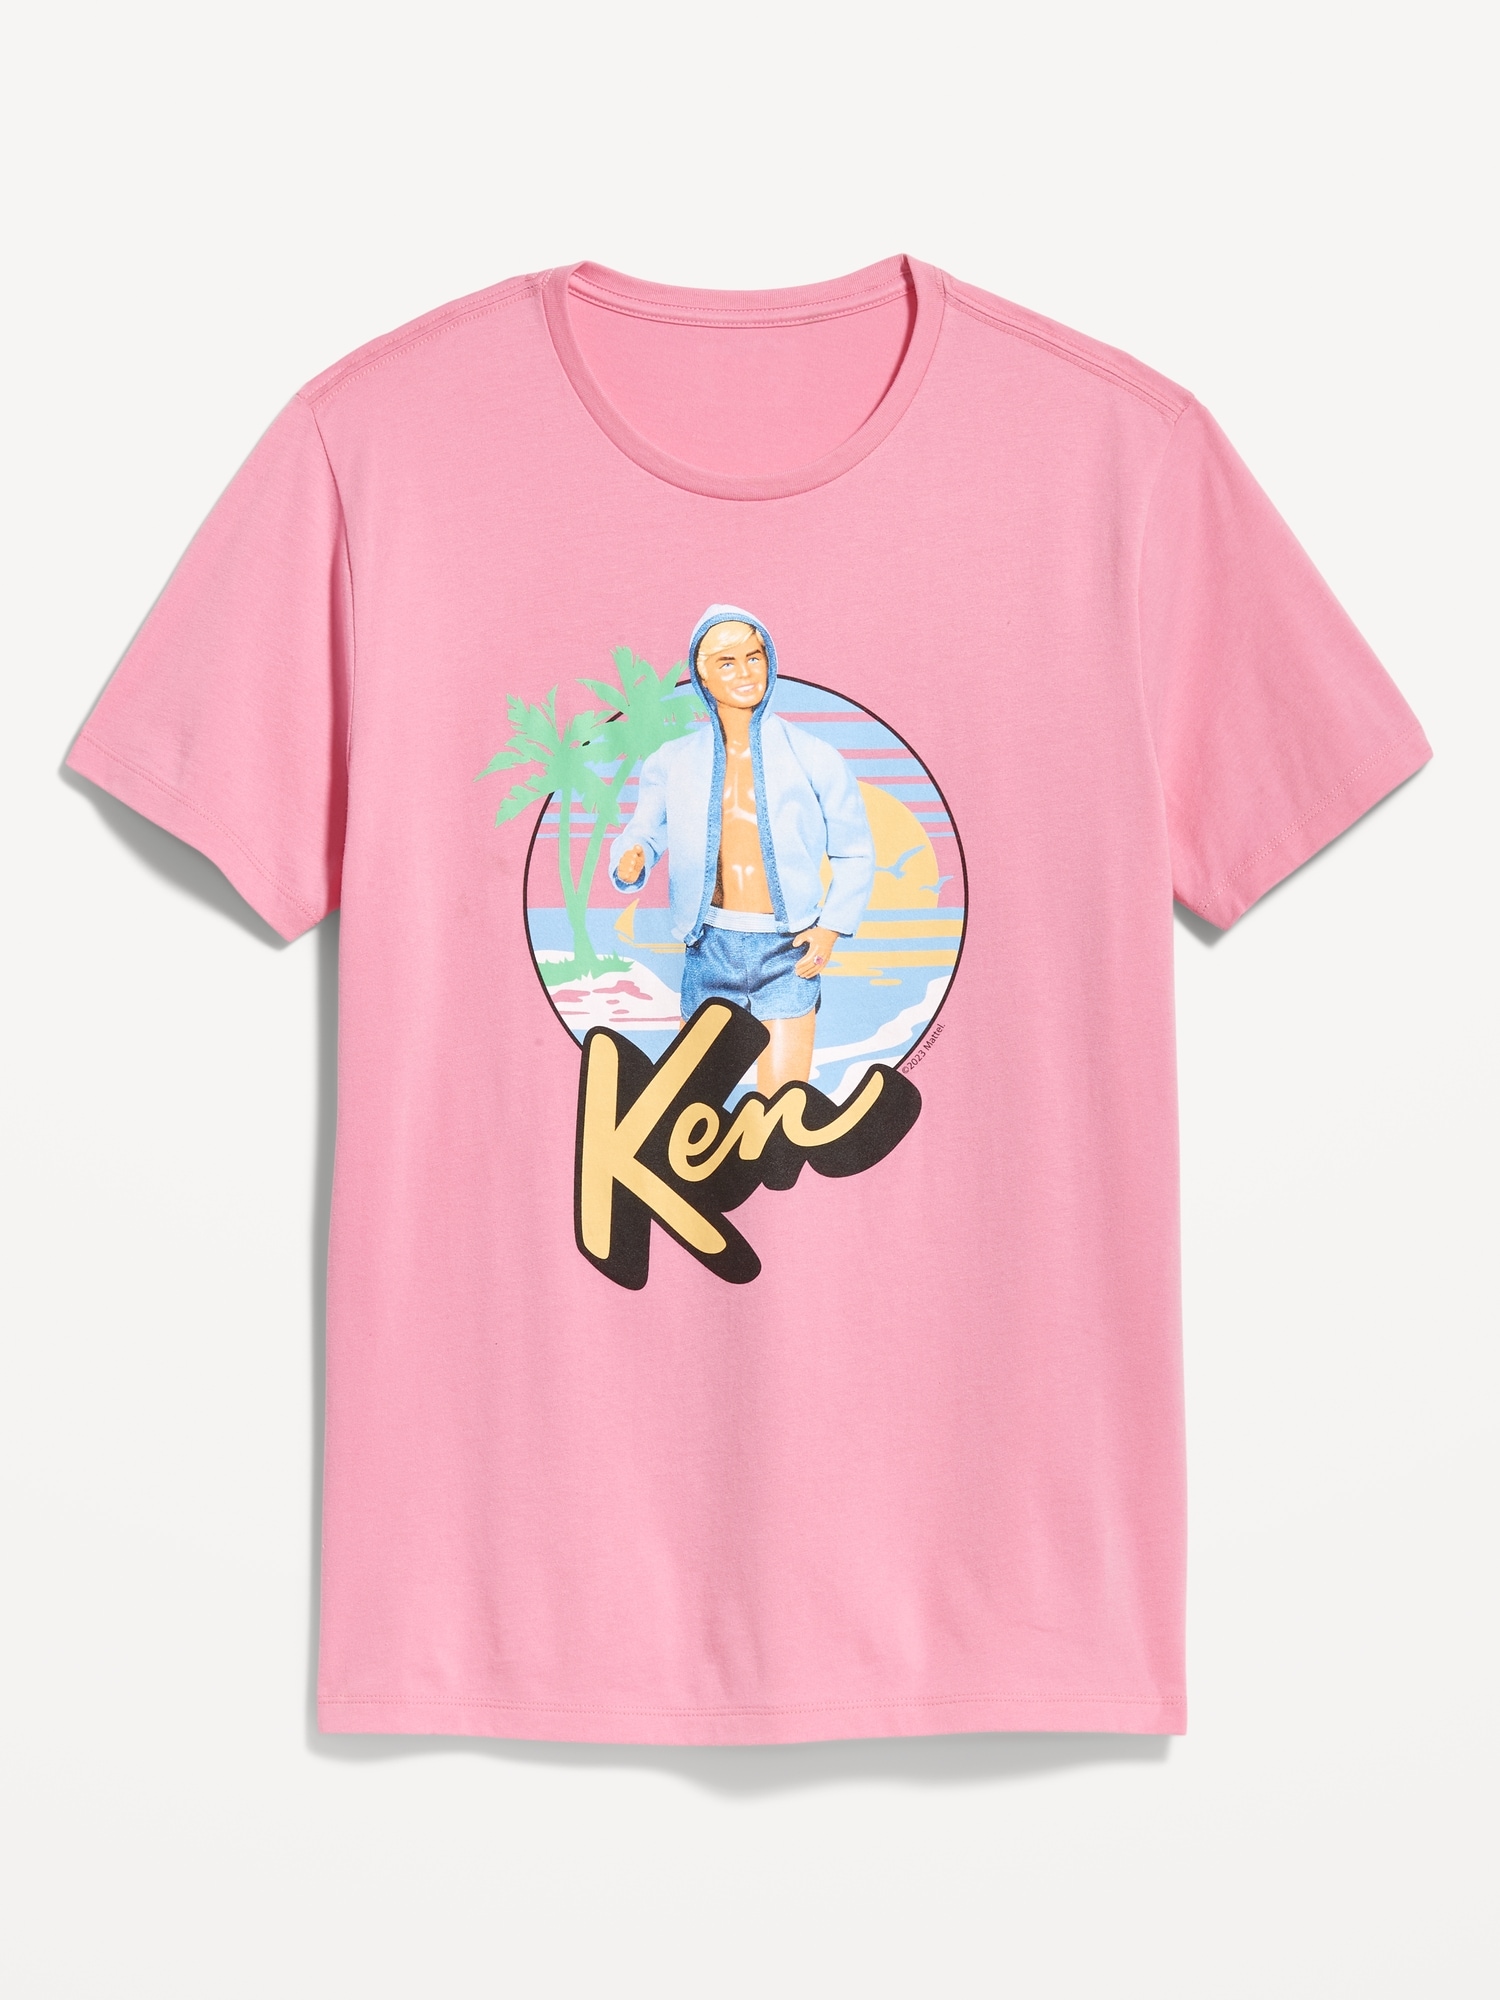 Barbie™ Ken Doll Gender-Neutral Graphic T-Shirt for Adults | Old Navy